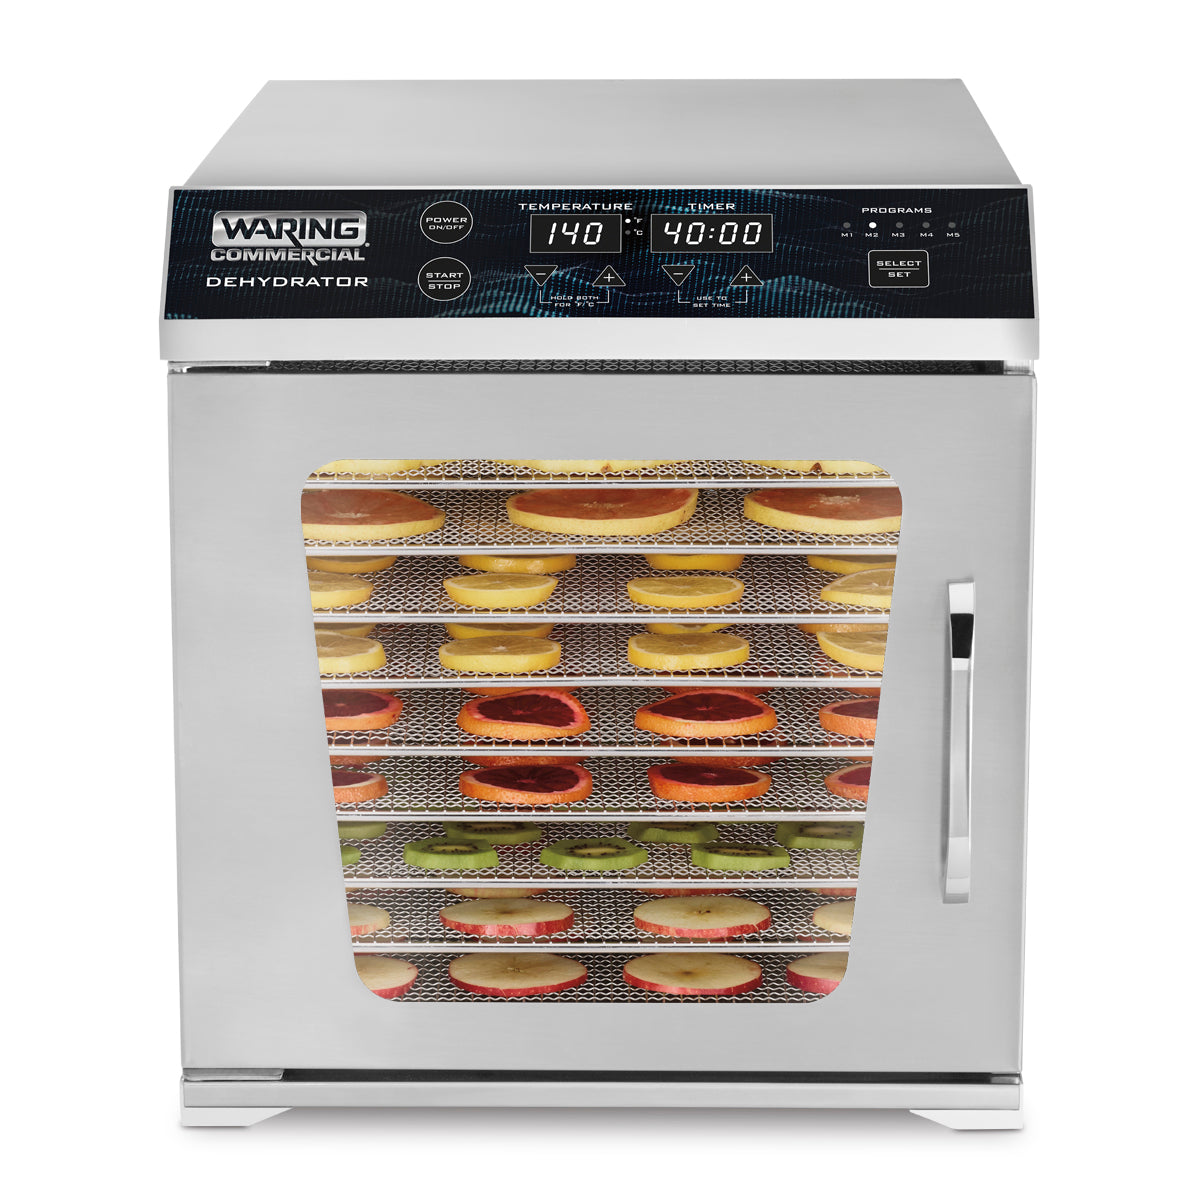 WDH10 Commercial 10-Tray Dehydrator by Waring Commercial